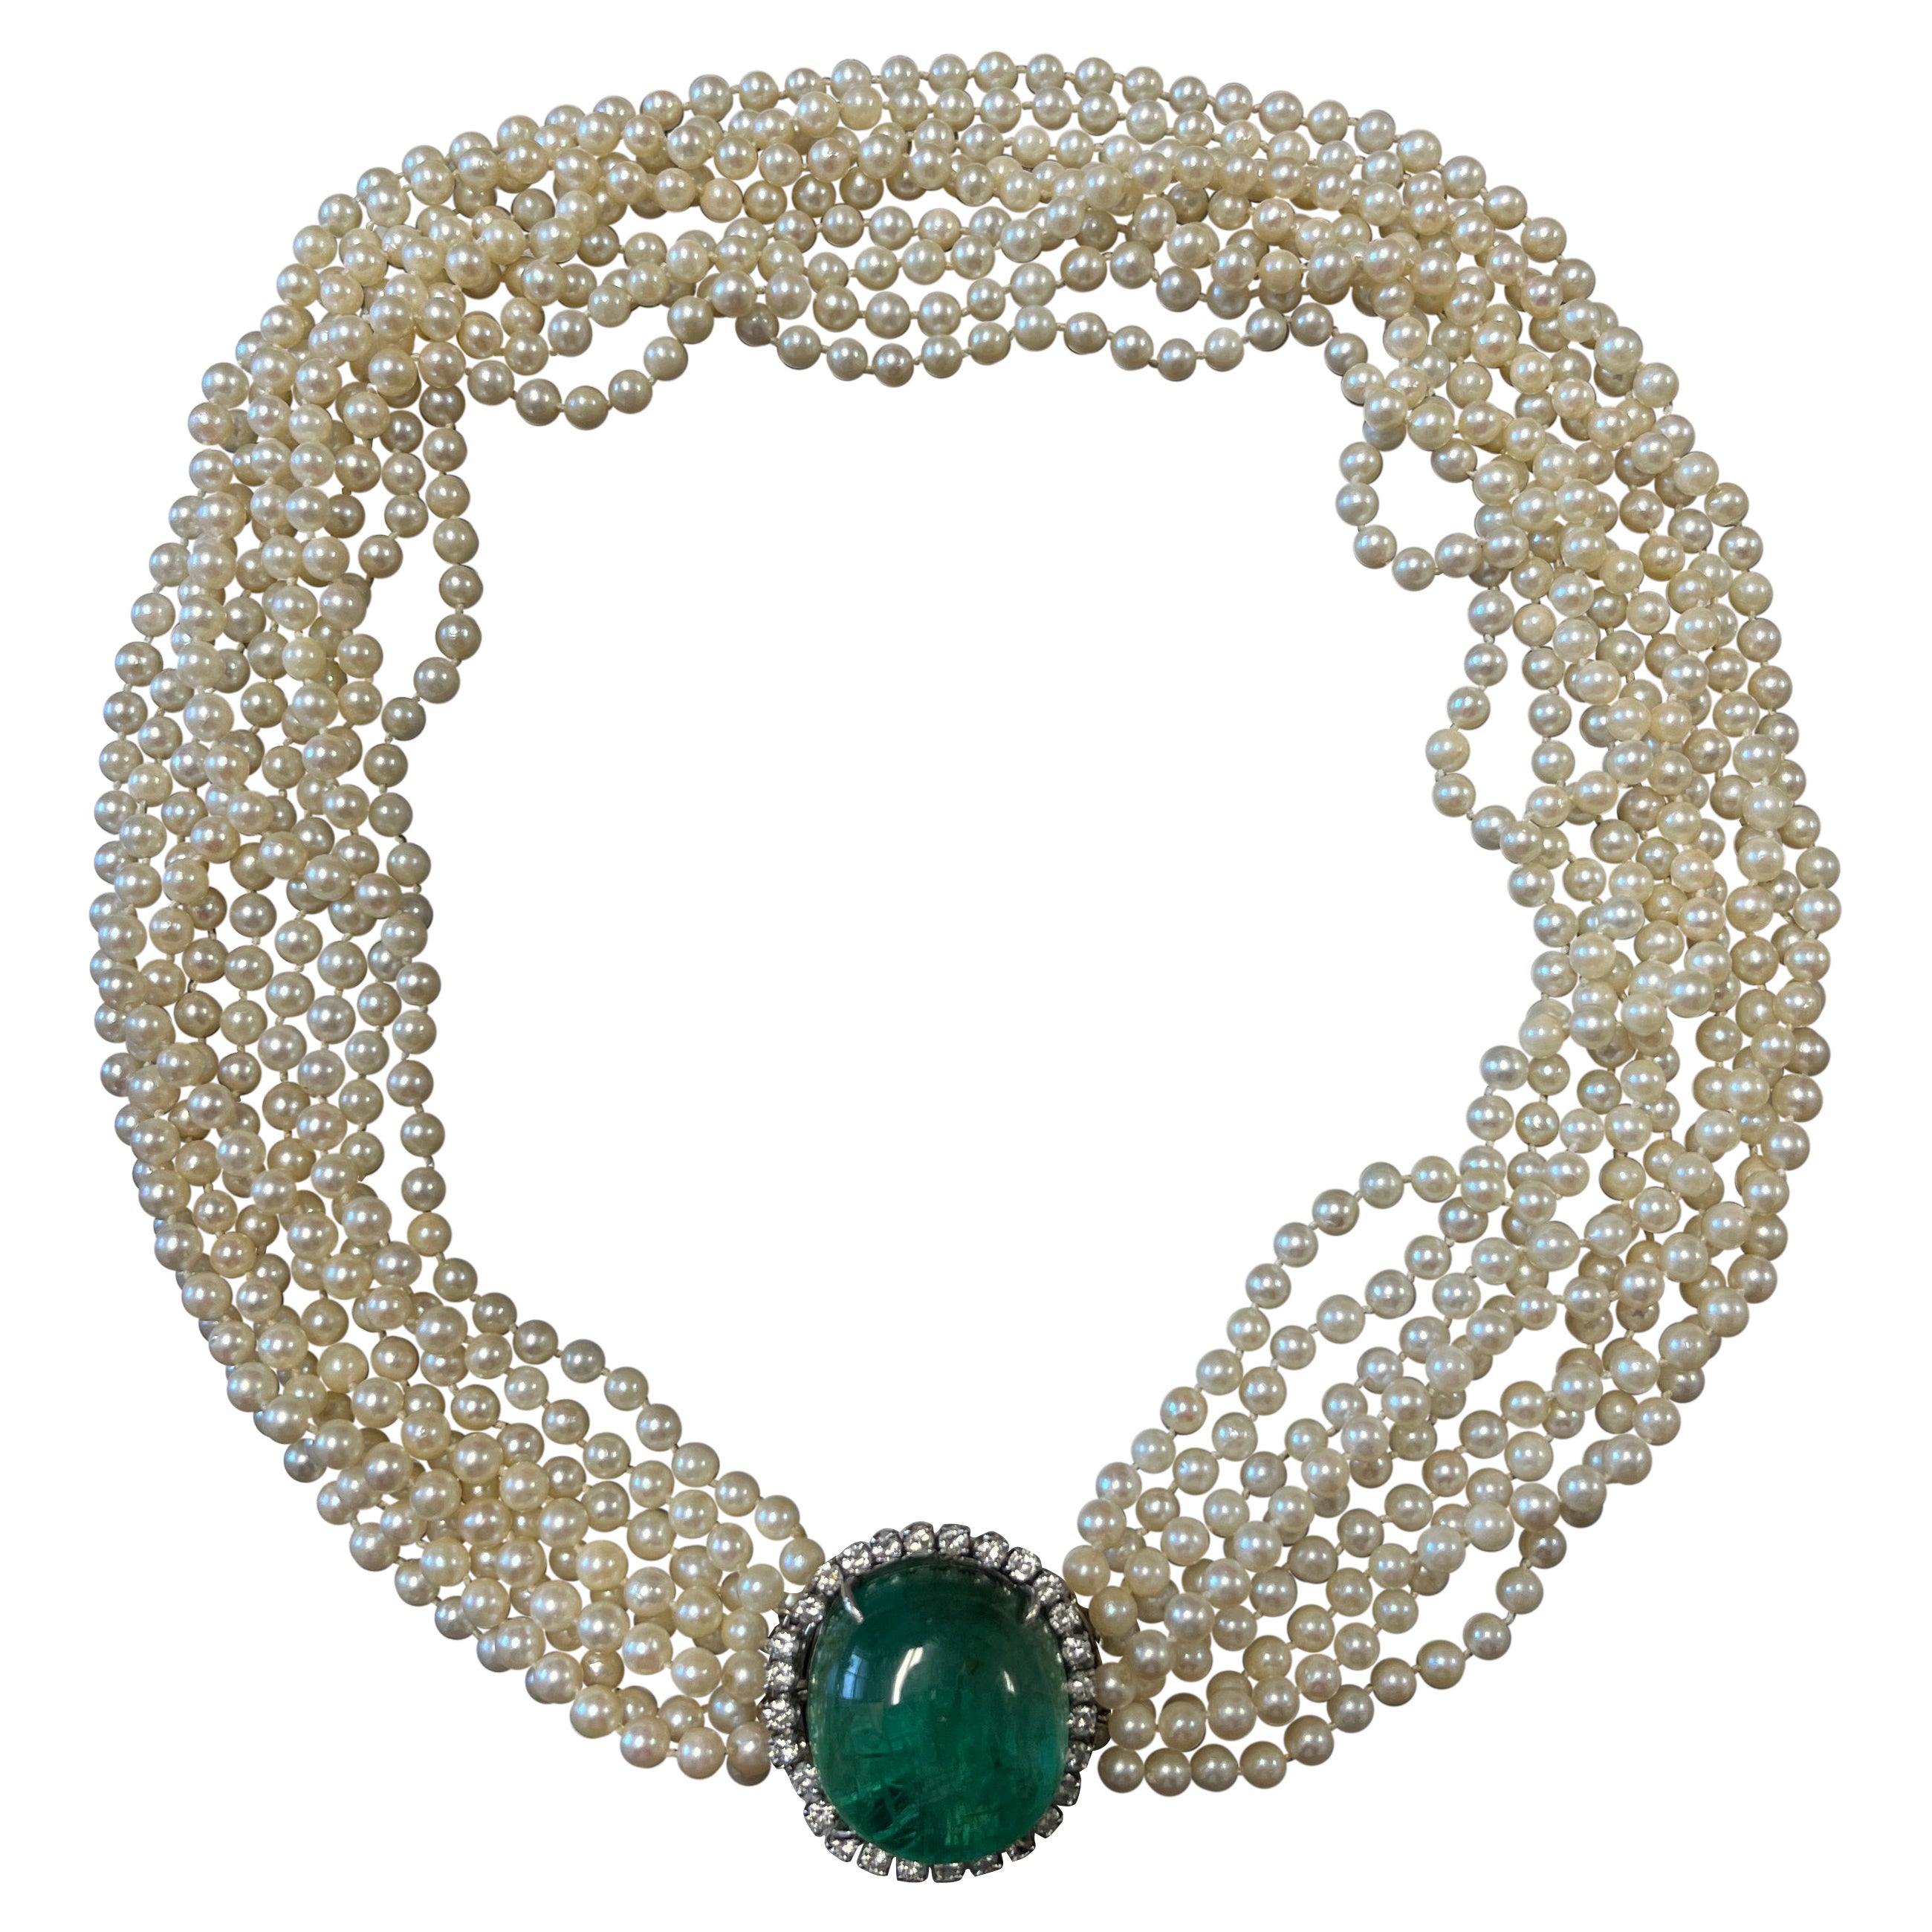 Vintage Cabochon Cut Emerald Center and Pearl Multi Strand Necklace in 14K Gold